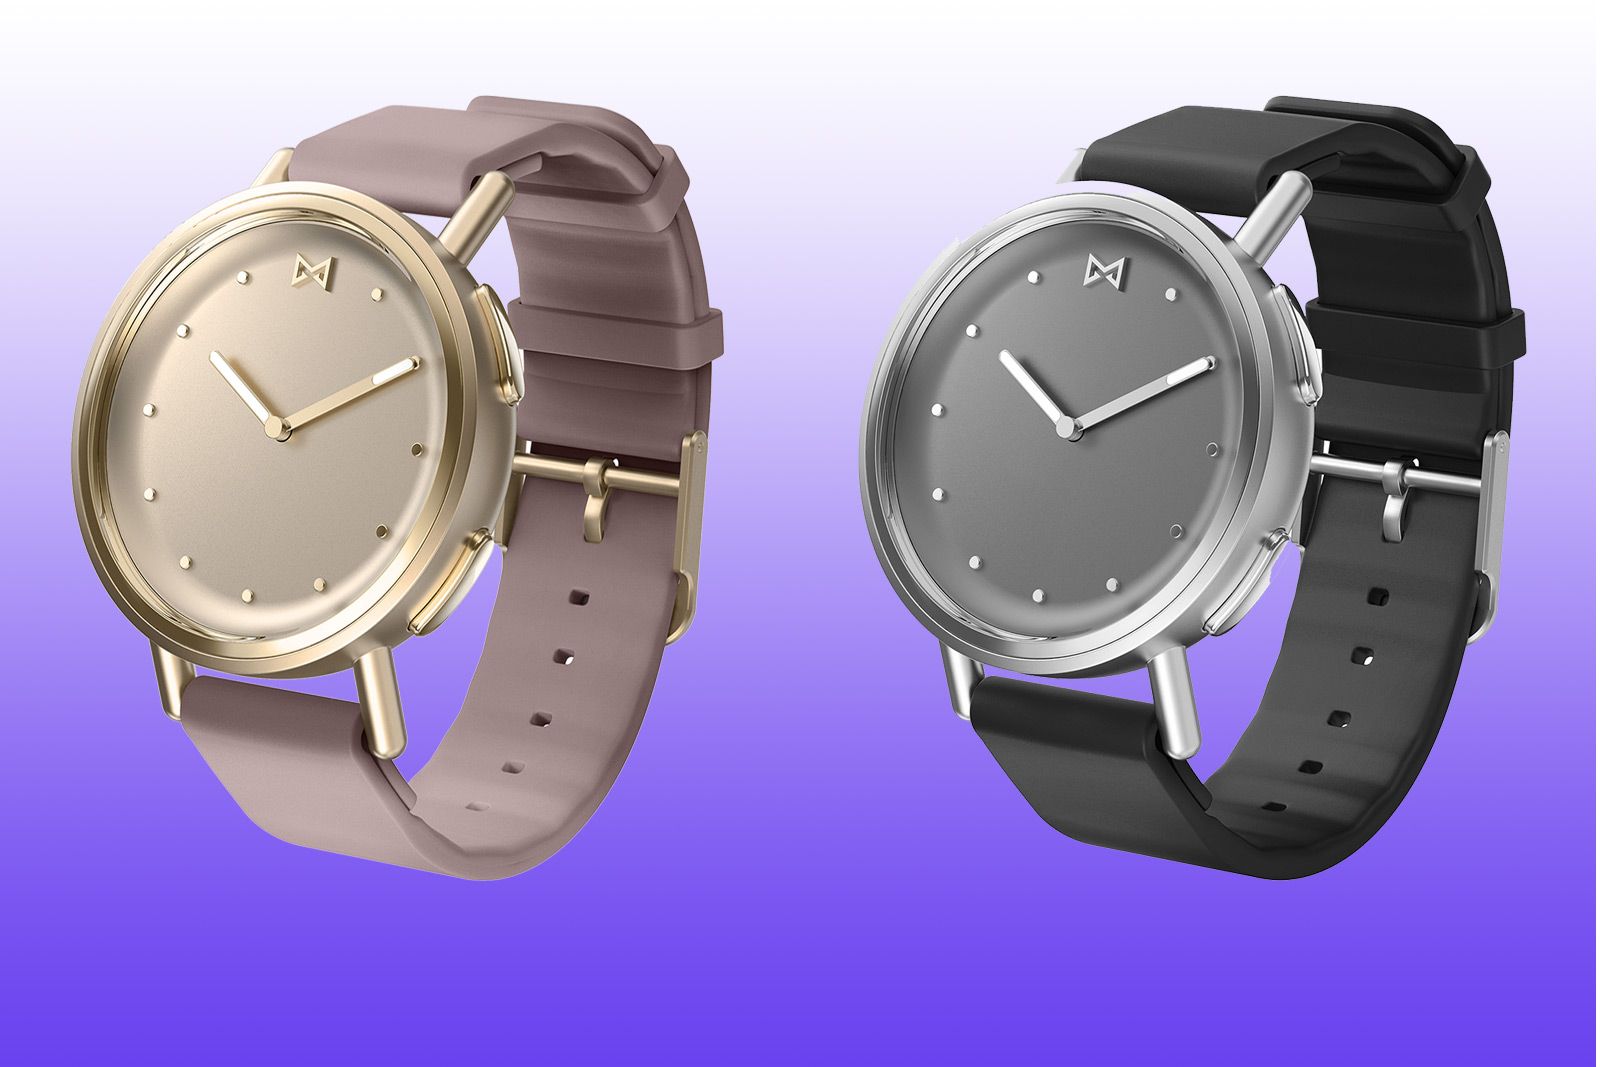 Misfit Path marries a sleek watch design with smart functions image 1